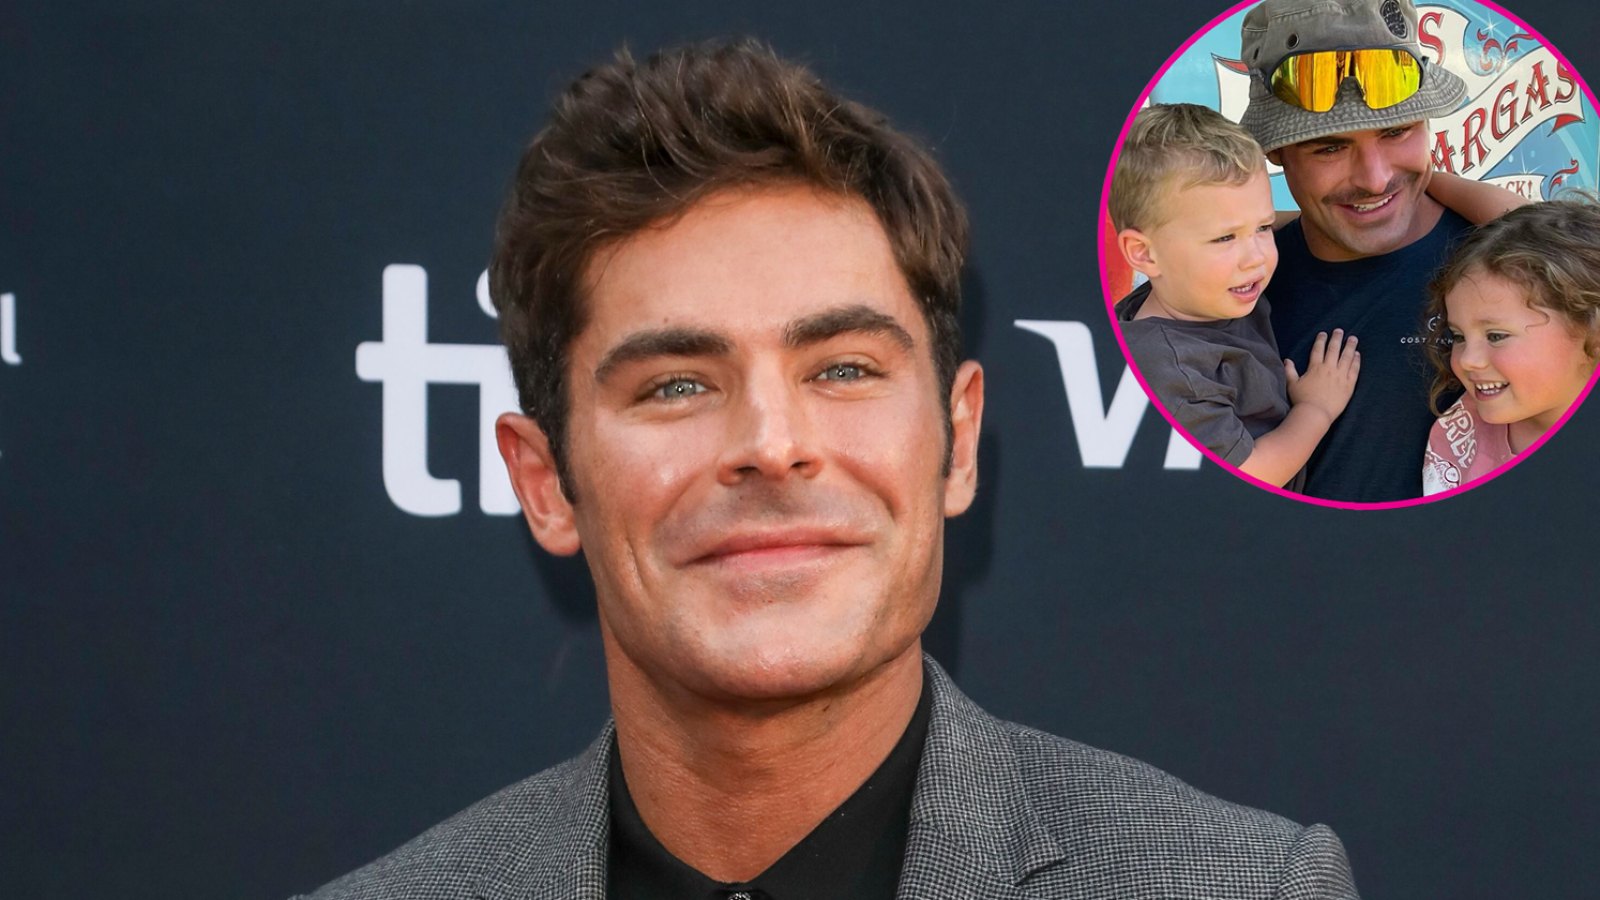 Zac Efron Shares Rare Photo With Younger Siblings During Family Outing